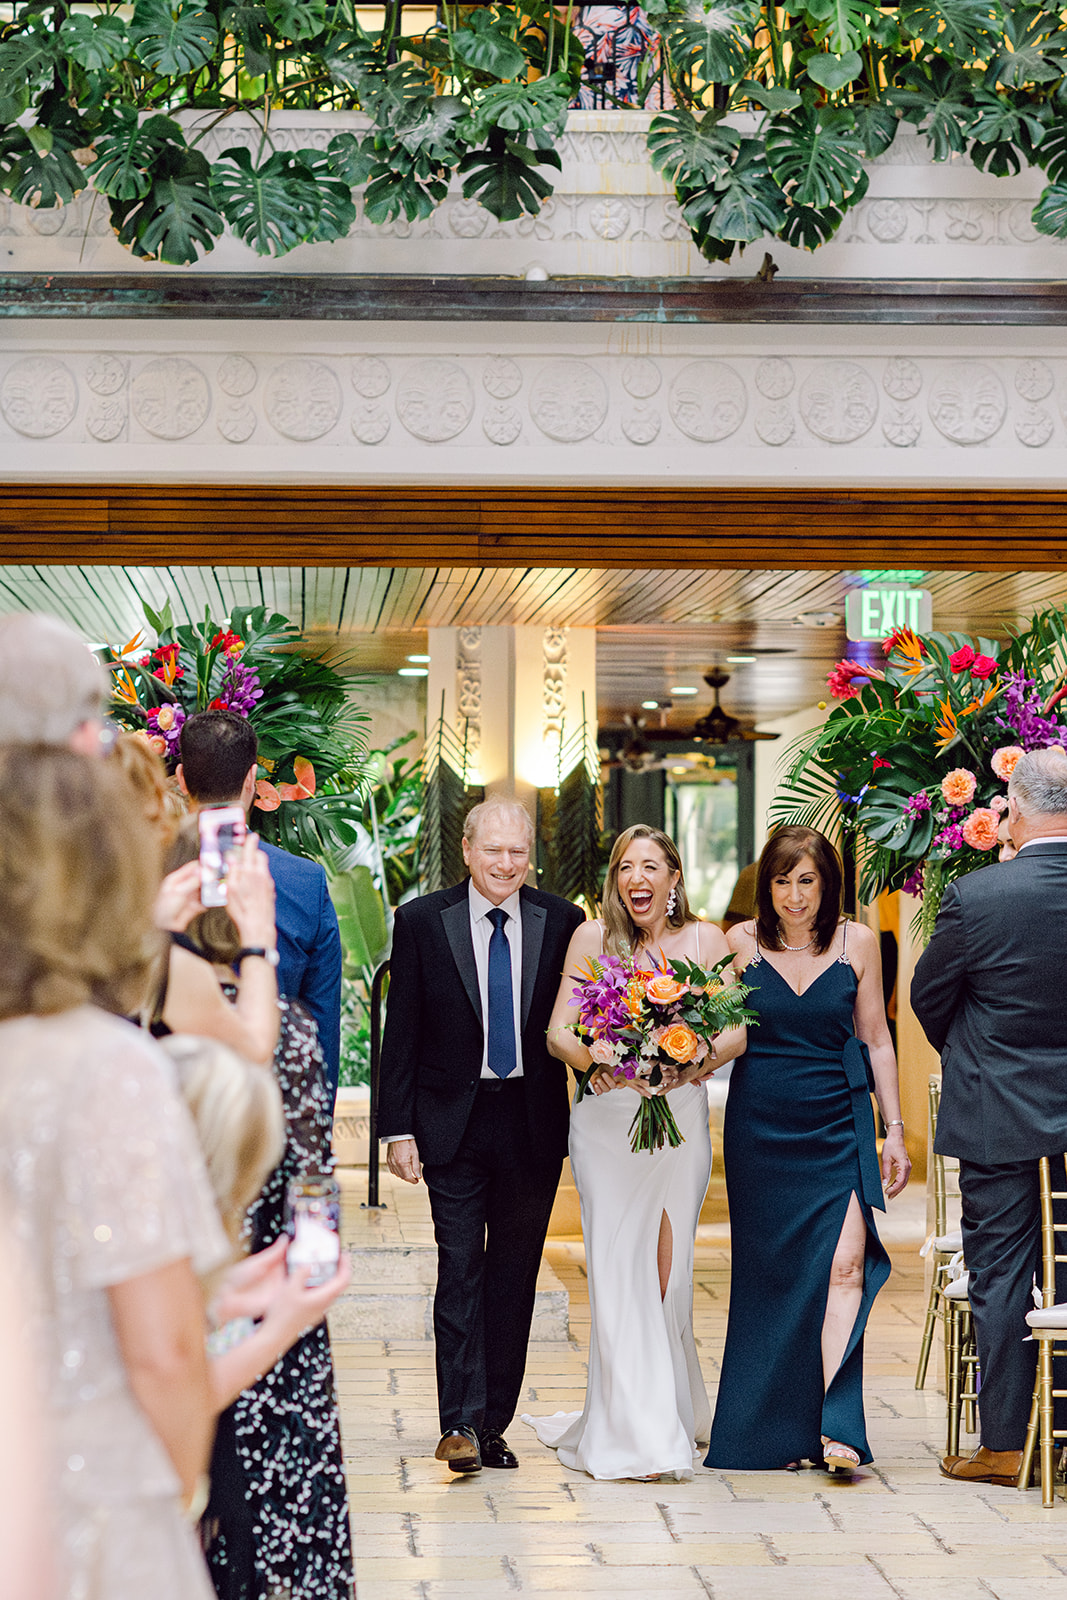 Bride with parents walk down aisle at ceremony at Mayfair House Hotel & Garden in Miami on wedding day.